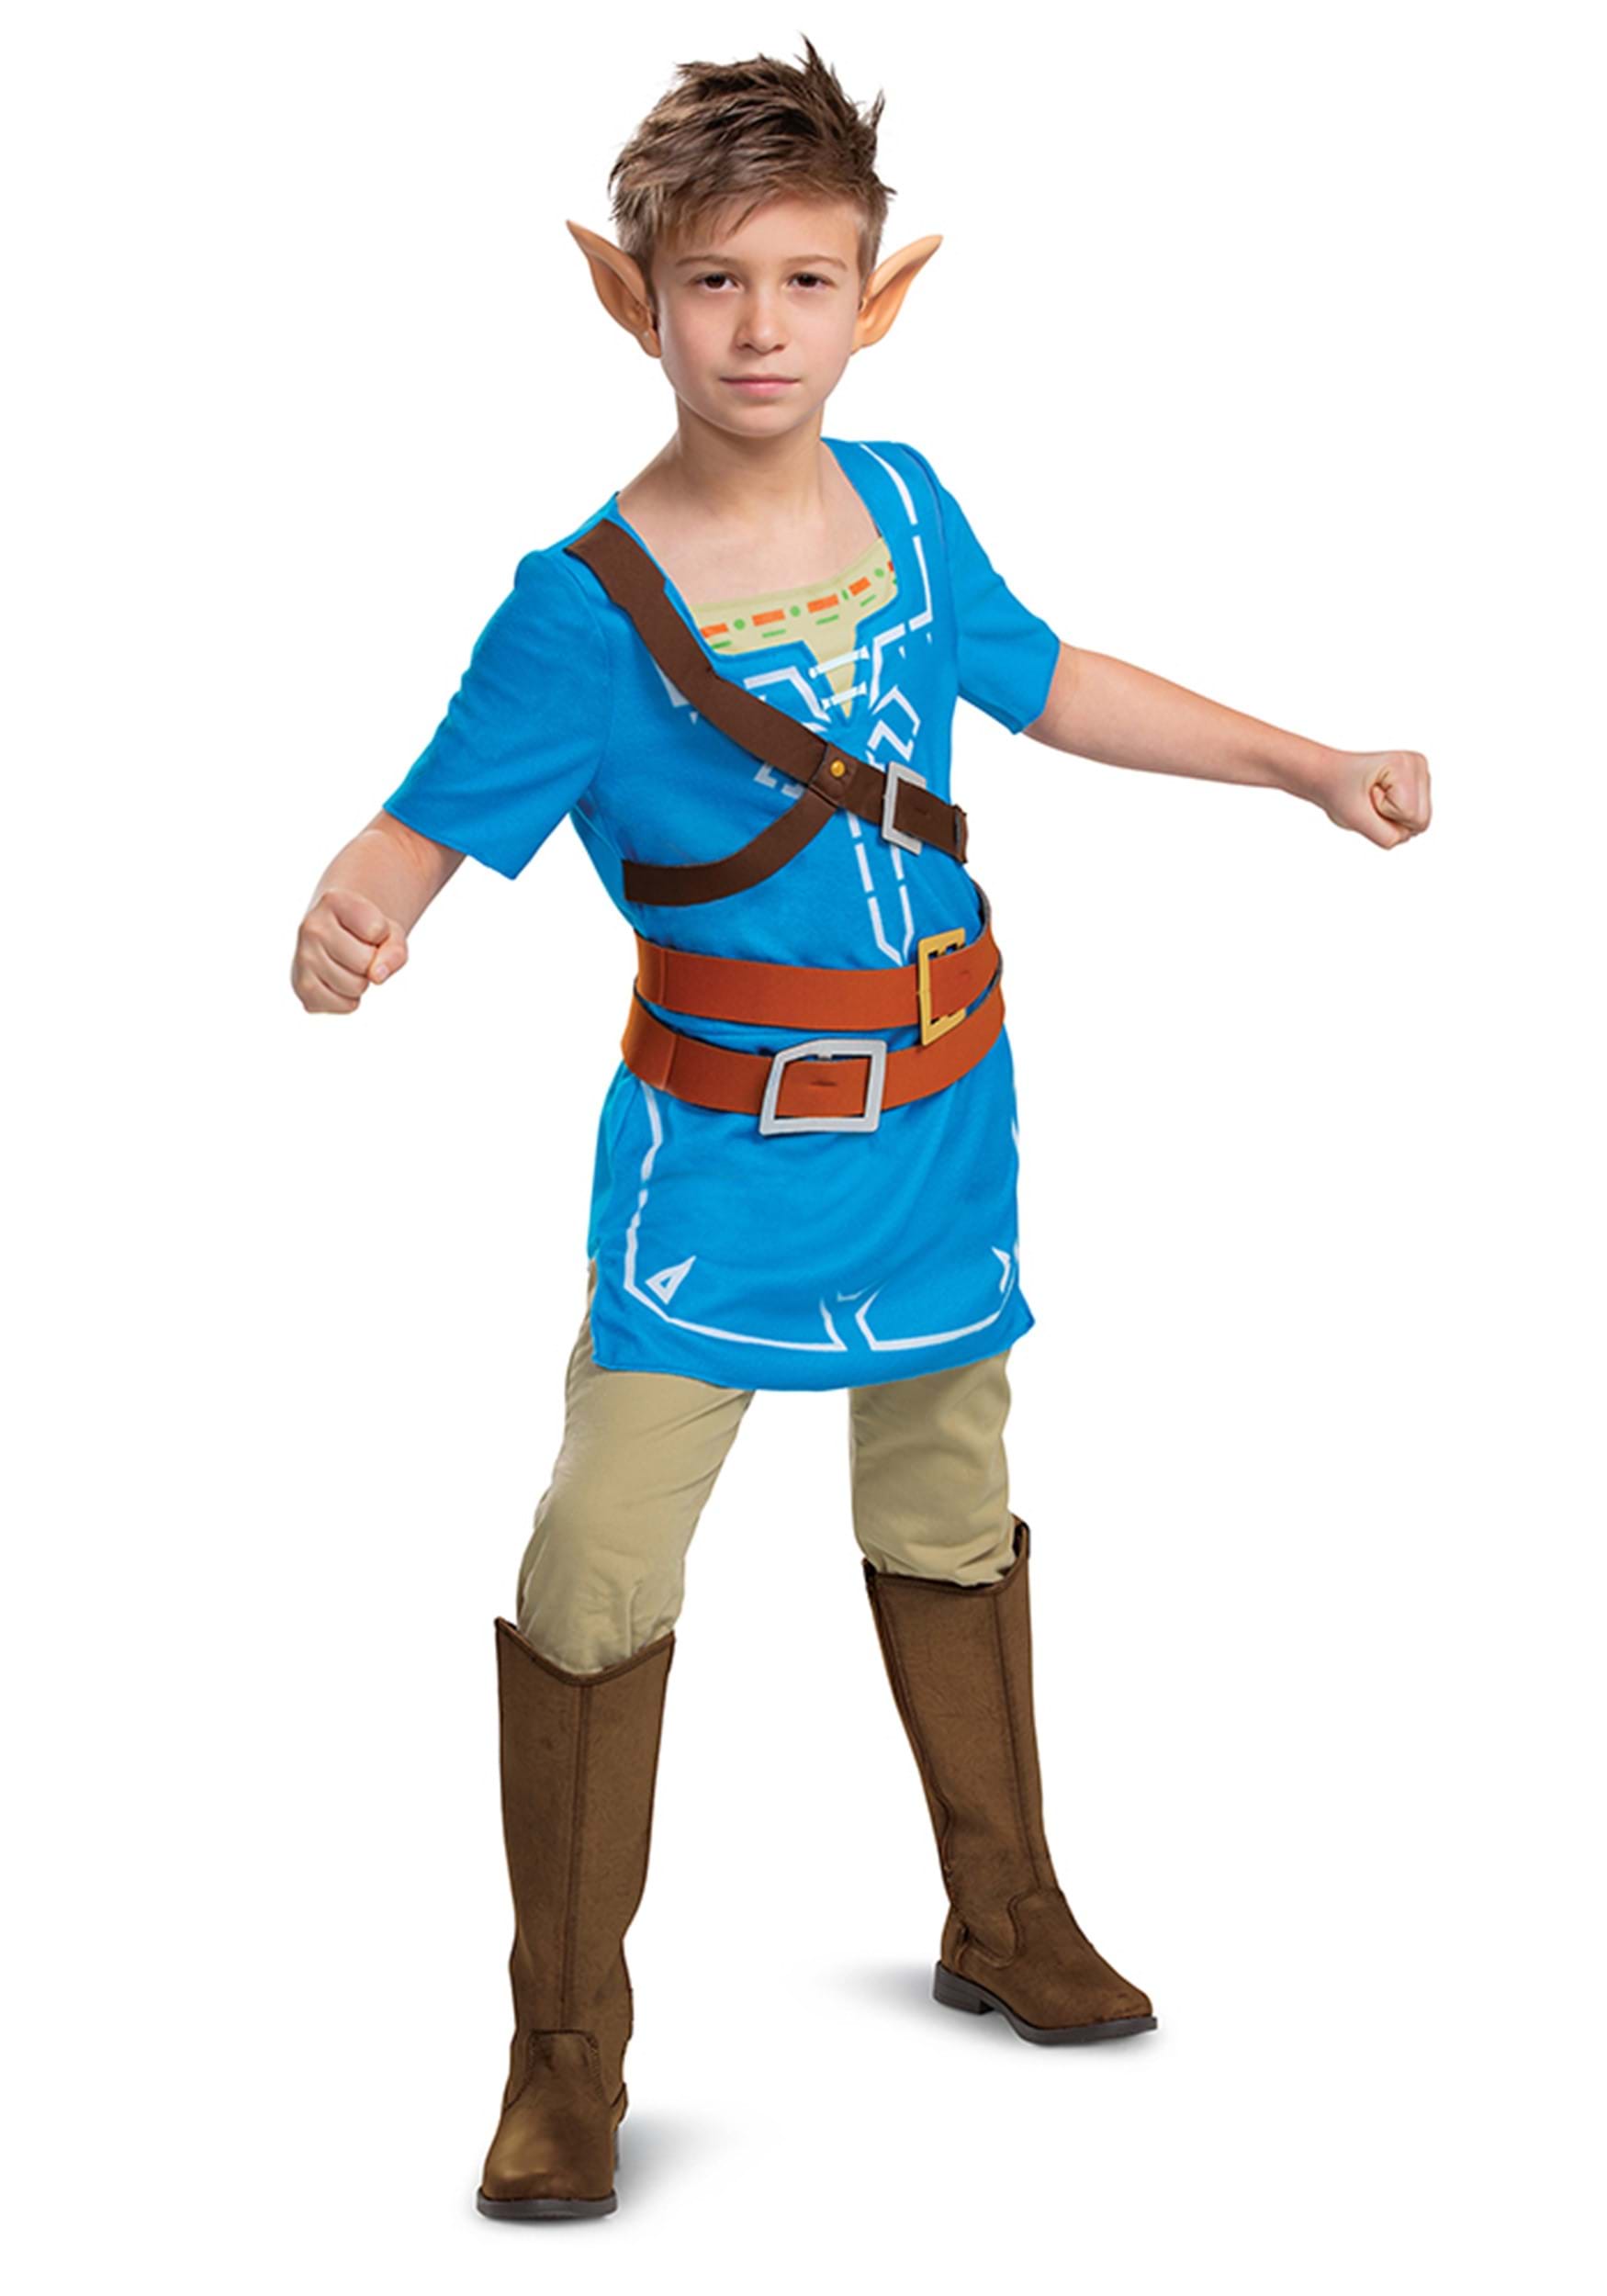 Link Breath of the Wild Classic Kids Costume